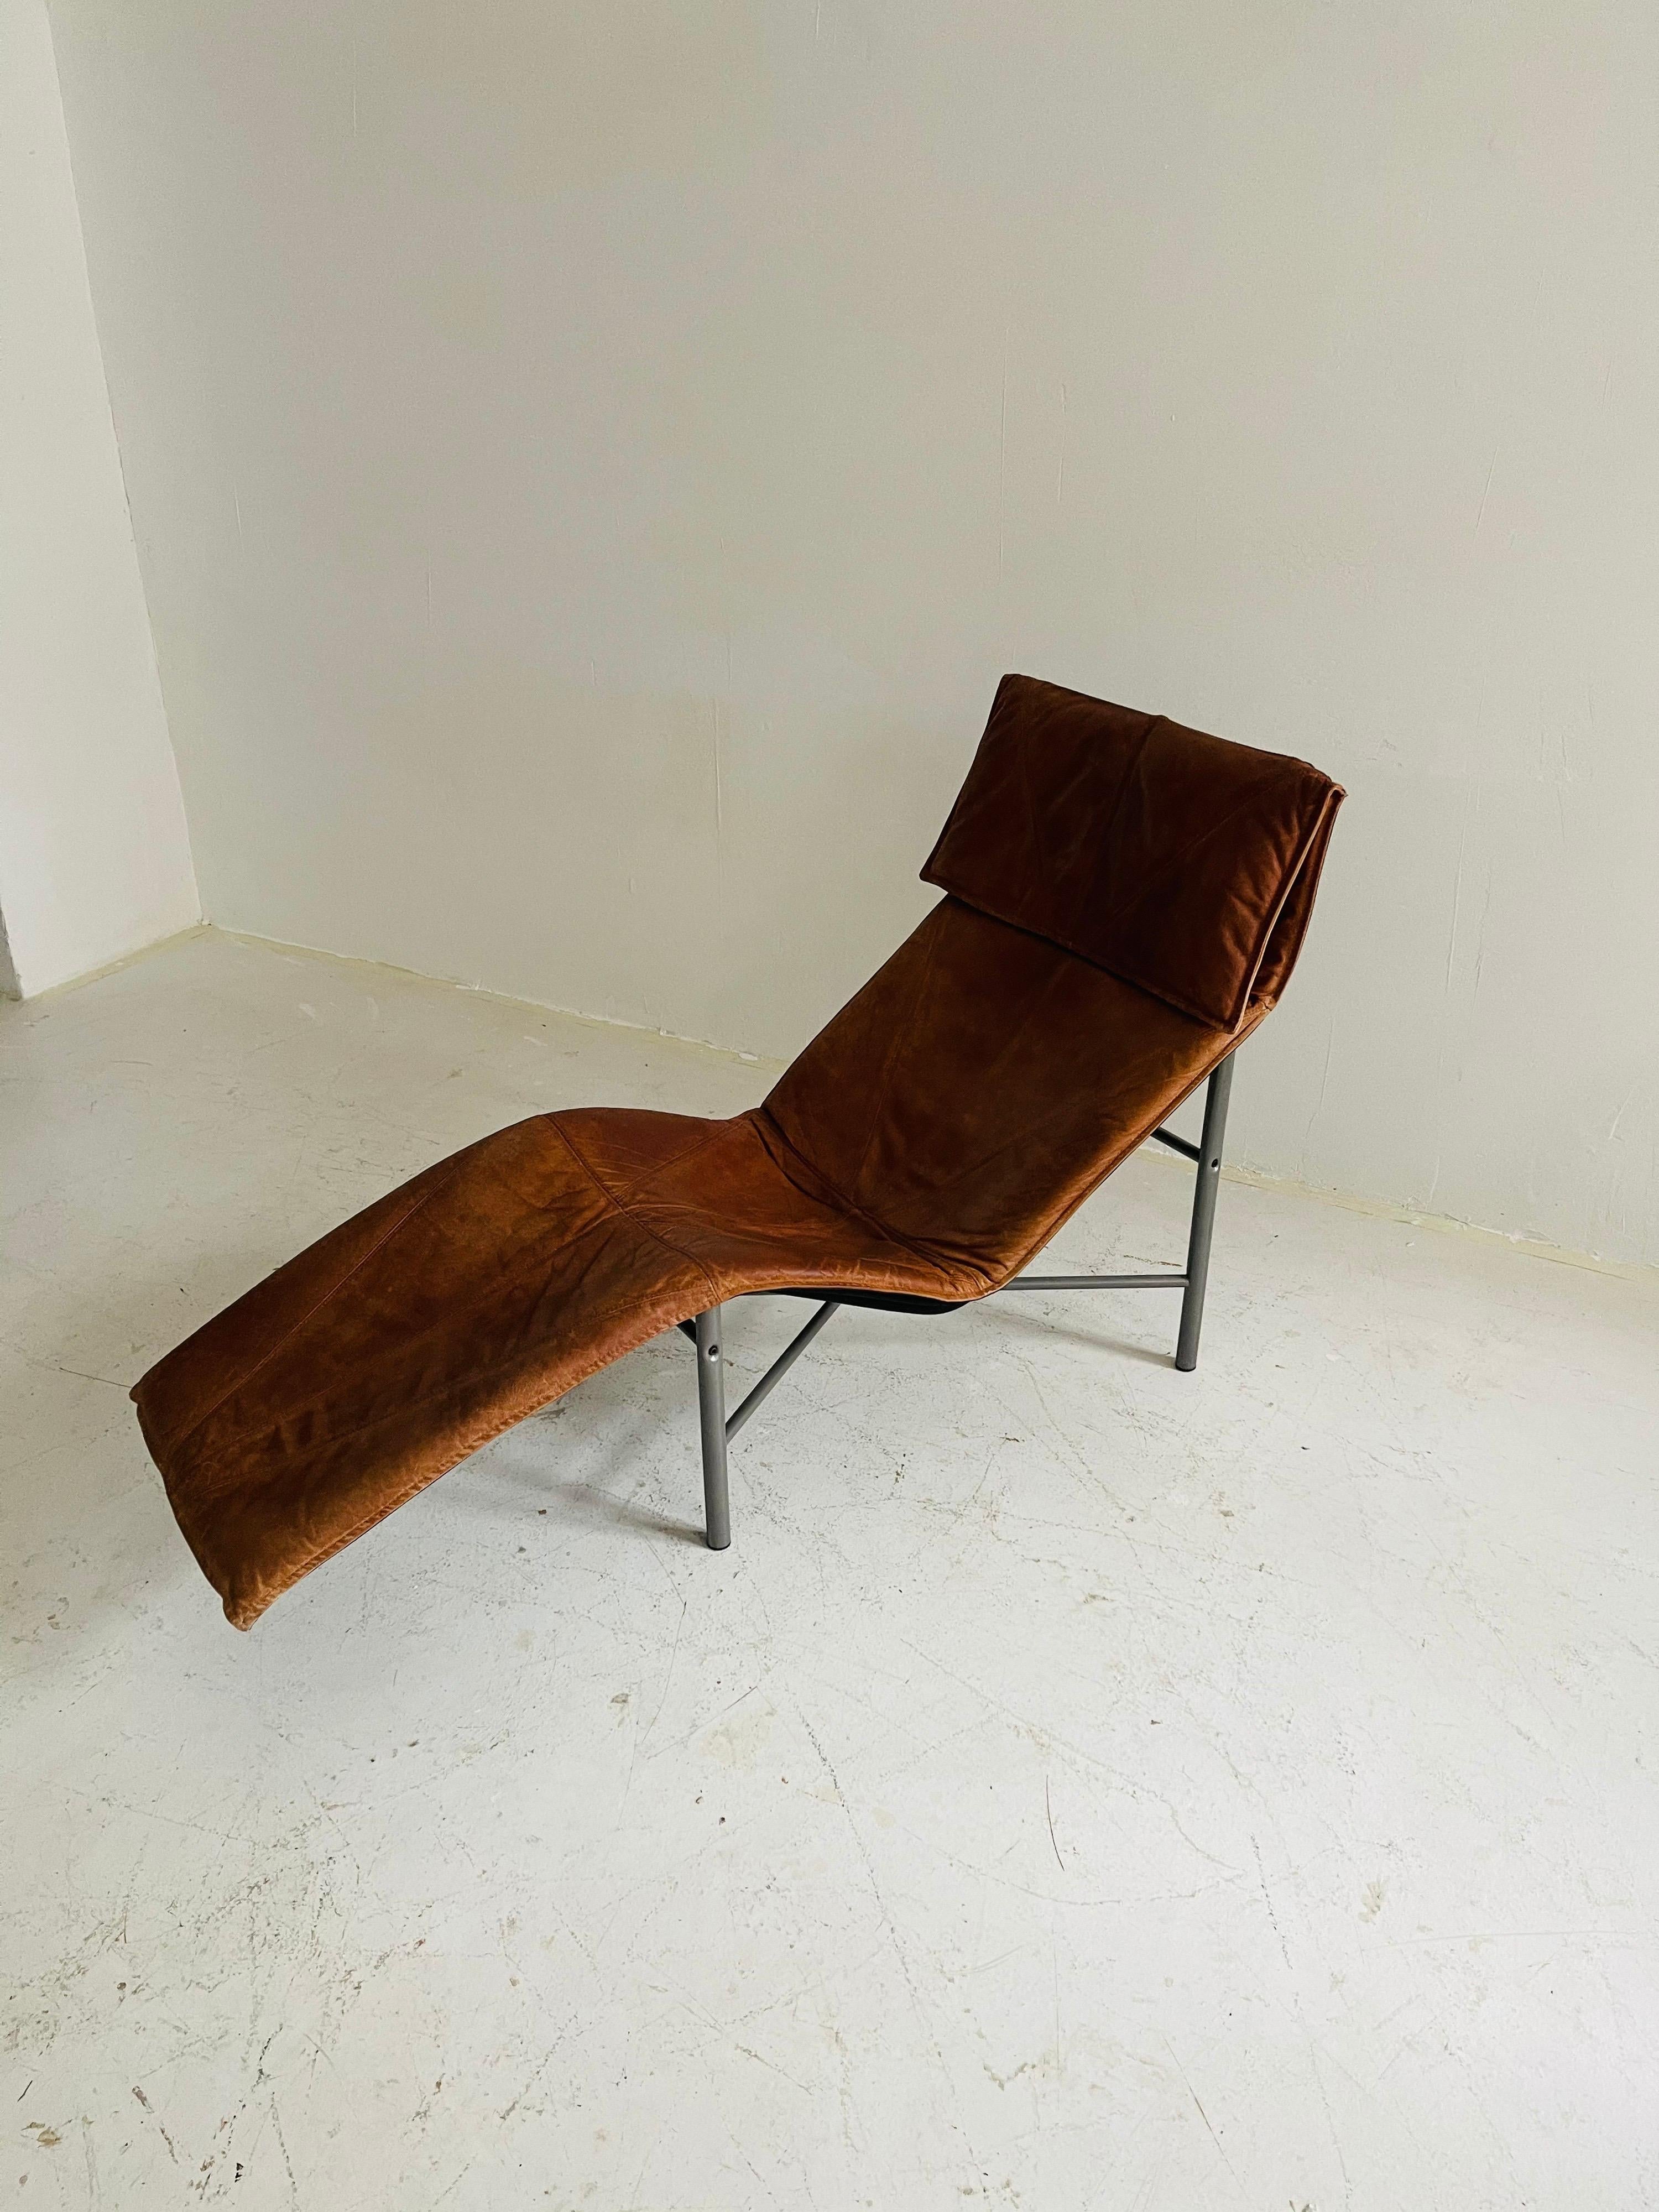 Patinated Cognac Leather Chaise Longue by Tord Bjorklund, Sweden, 1970 For Sale 12